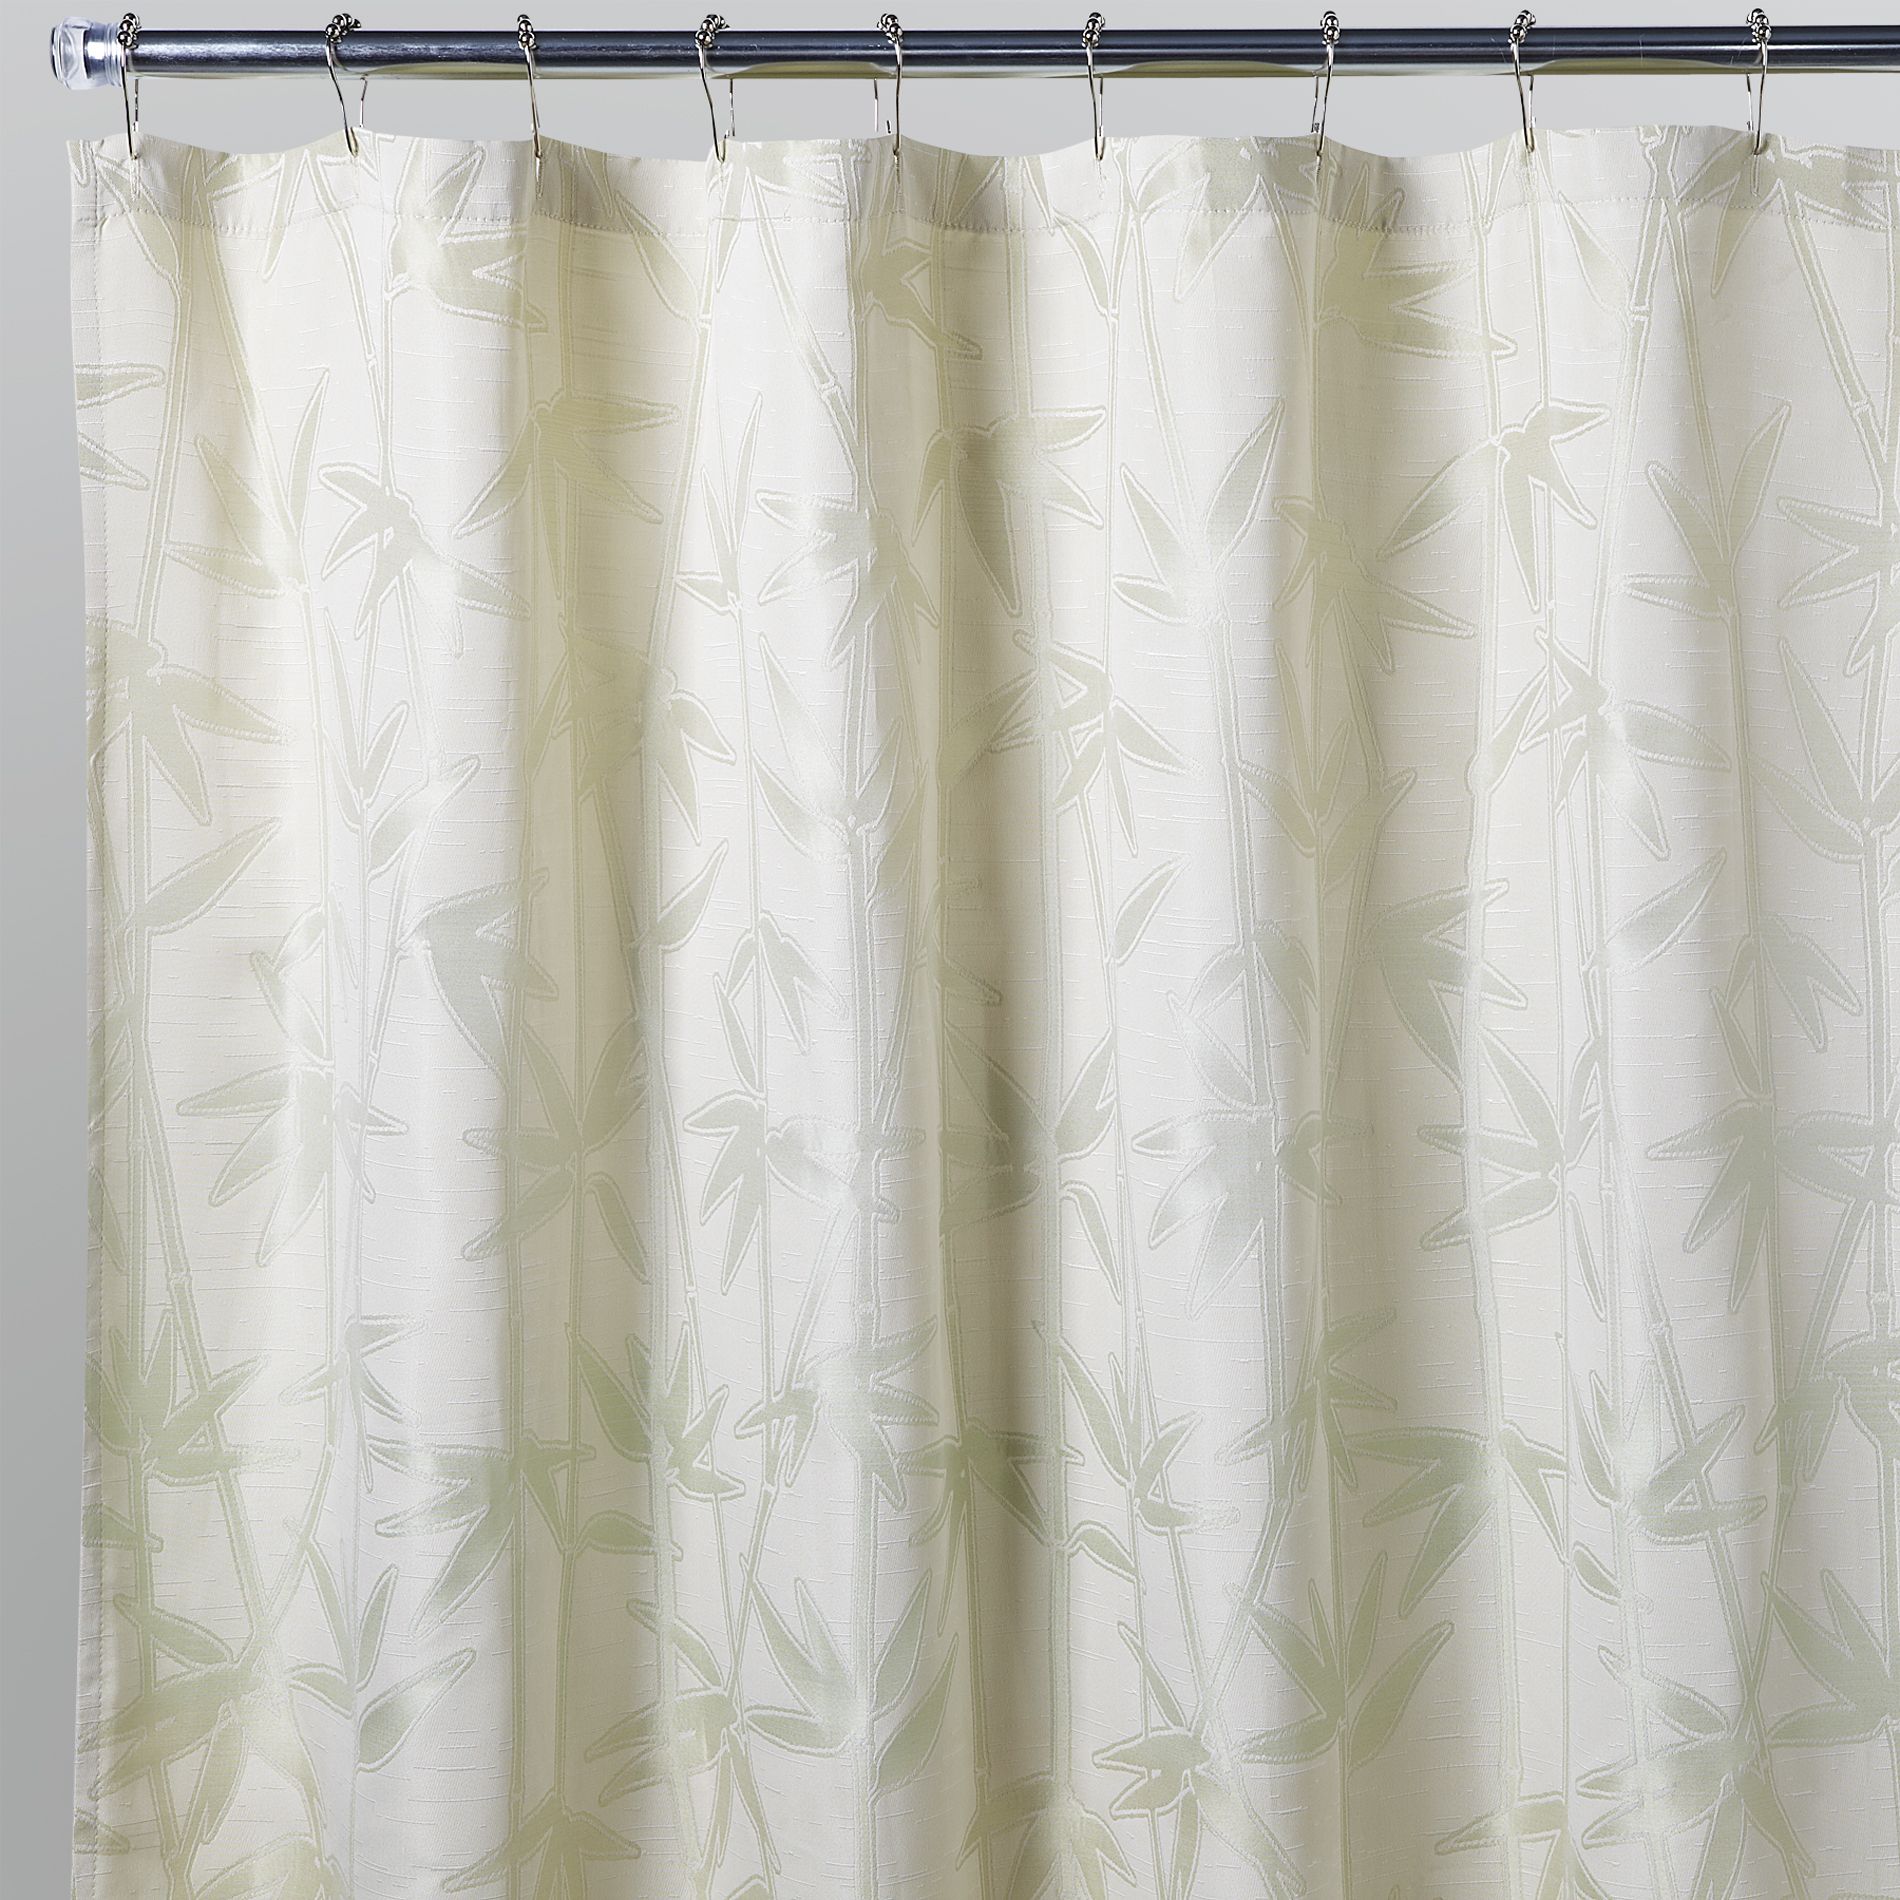 Home Solutions Ombre Bamboo Shower Curtain